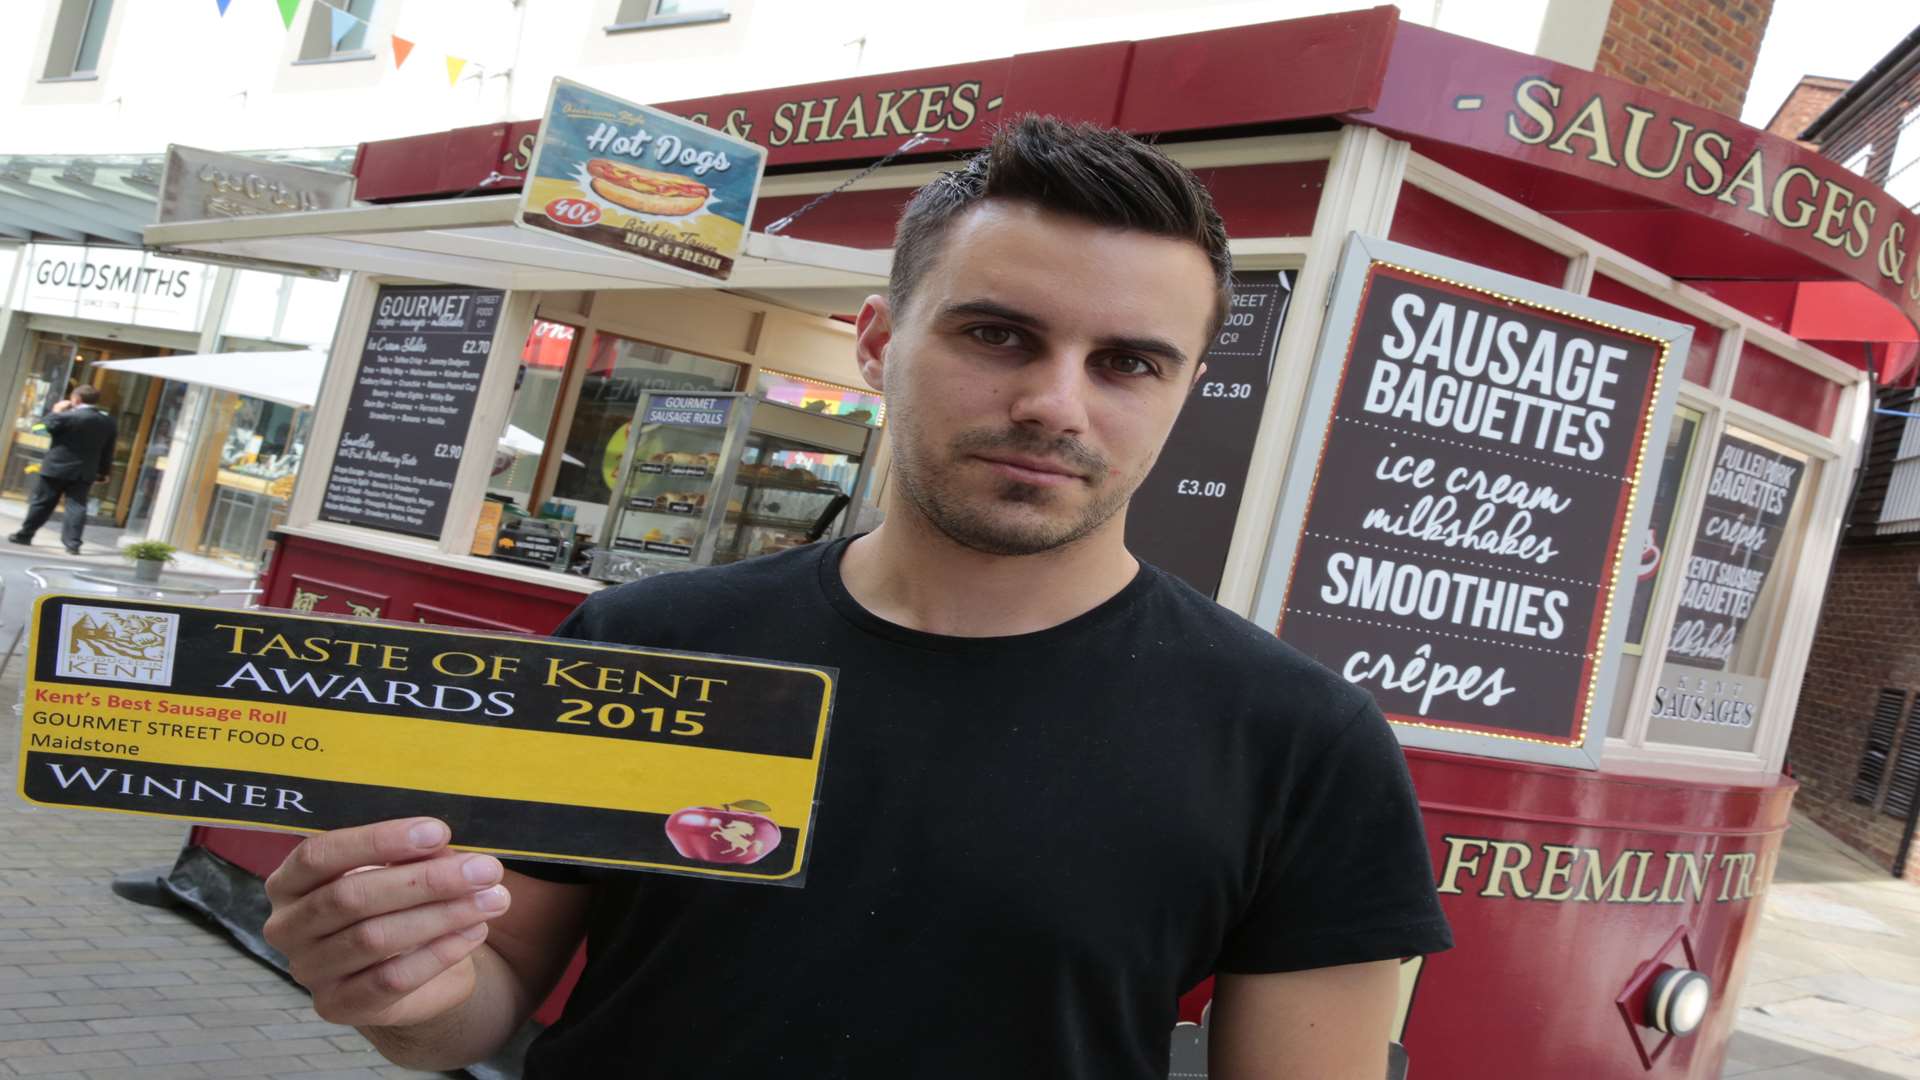 Sausage roll stall owner Ash Green was sold a fake award